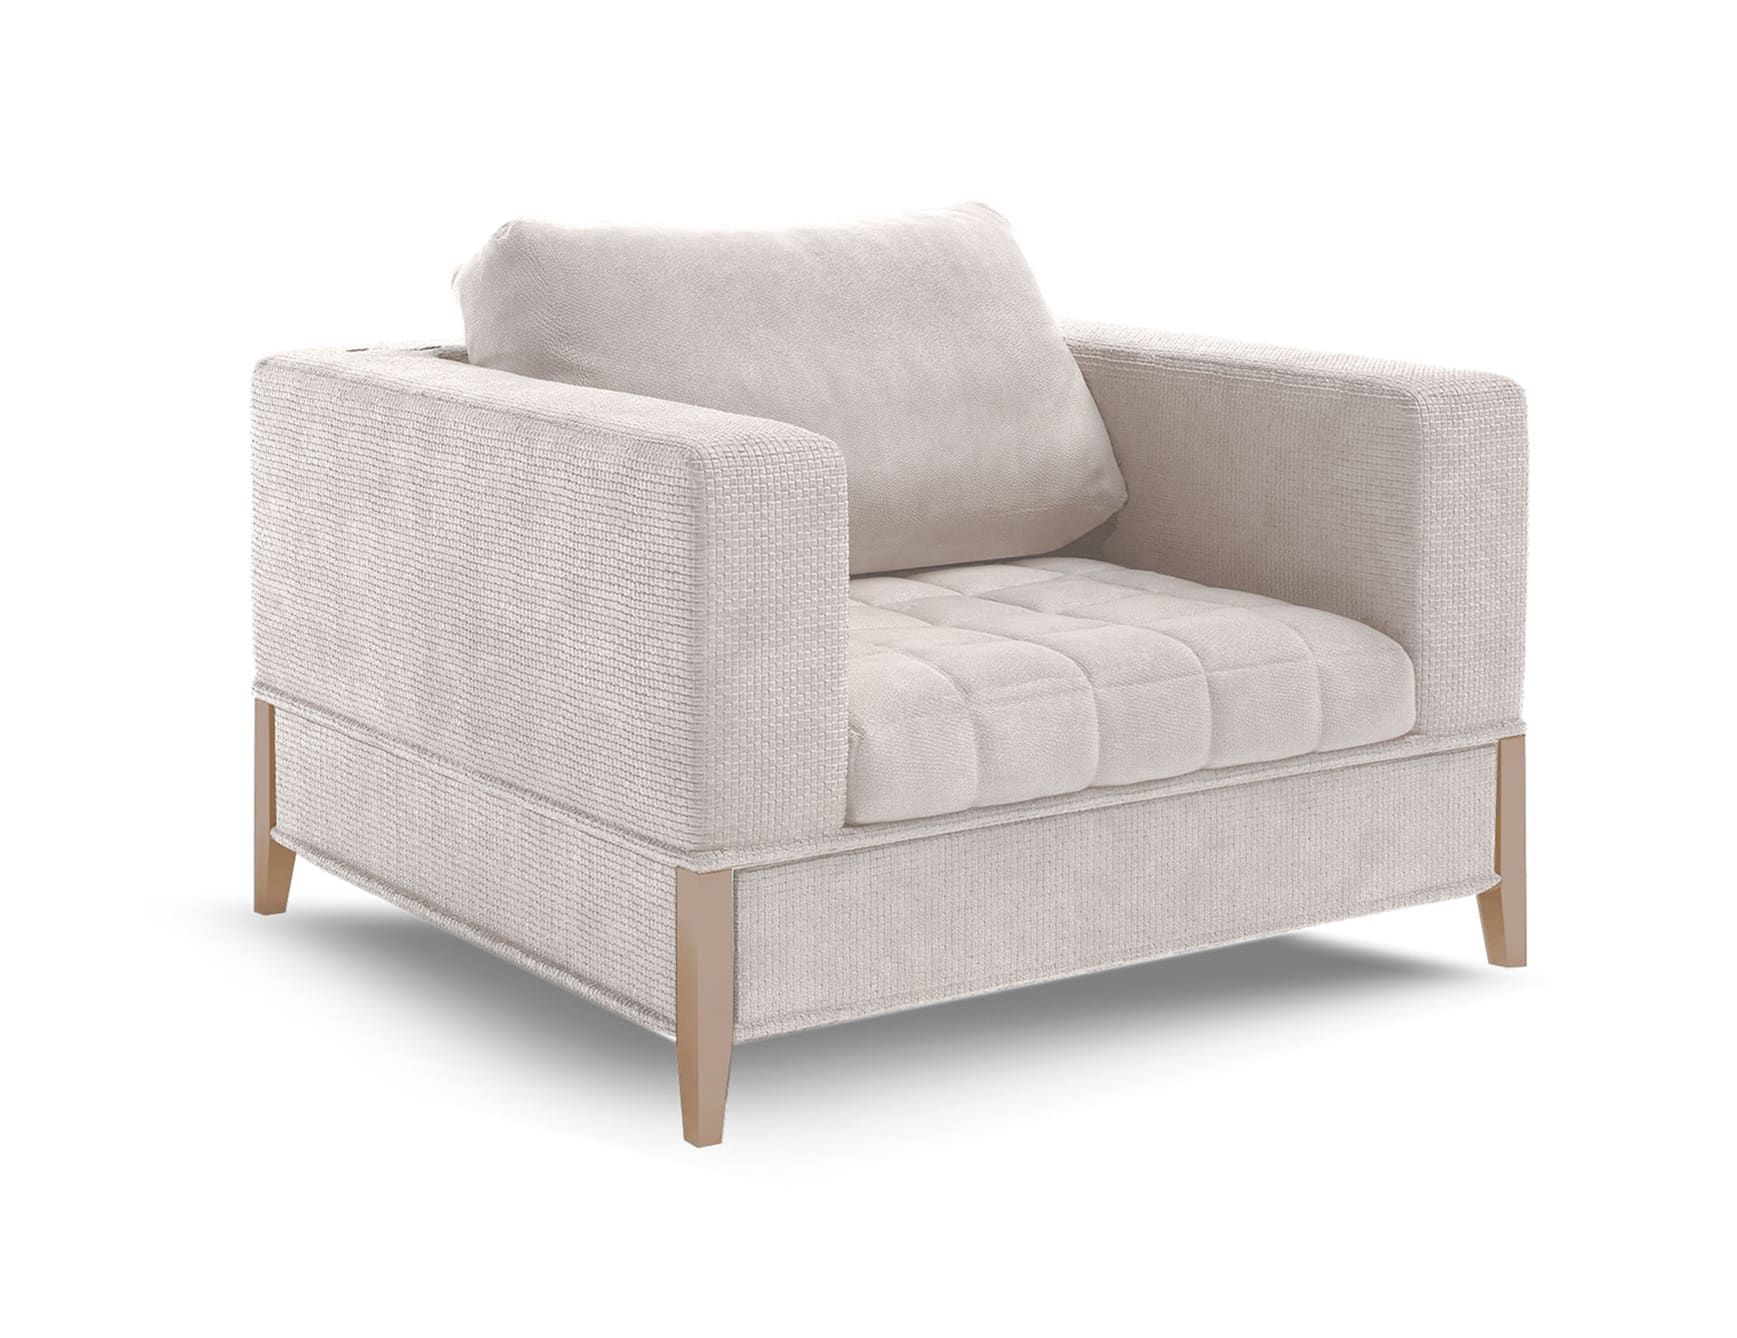 Oyster contemporary Italian sofa chair with beige fabric